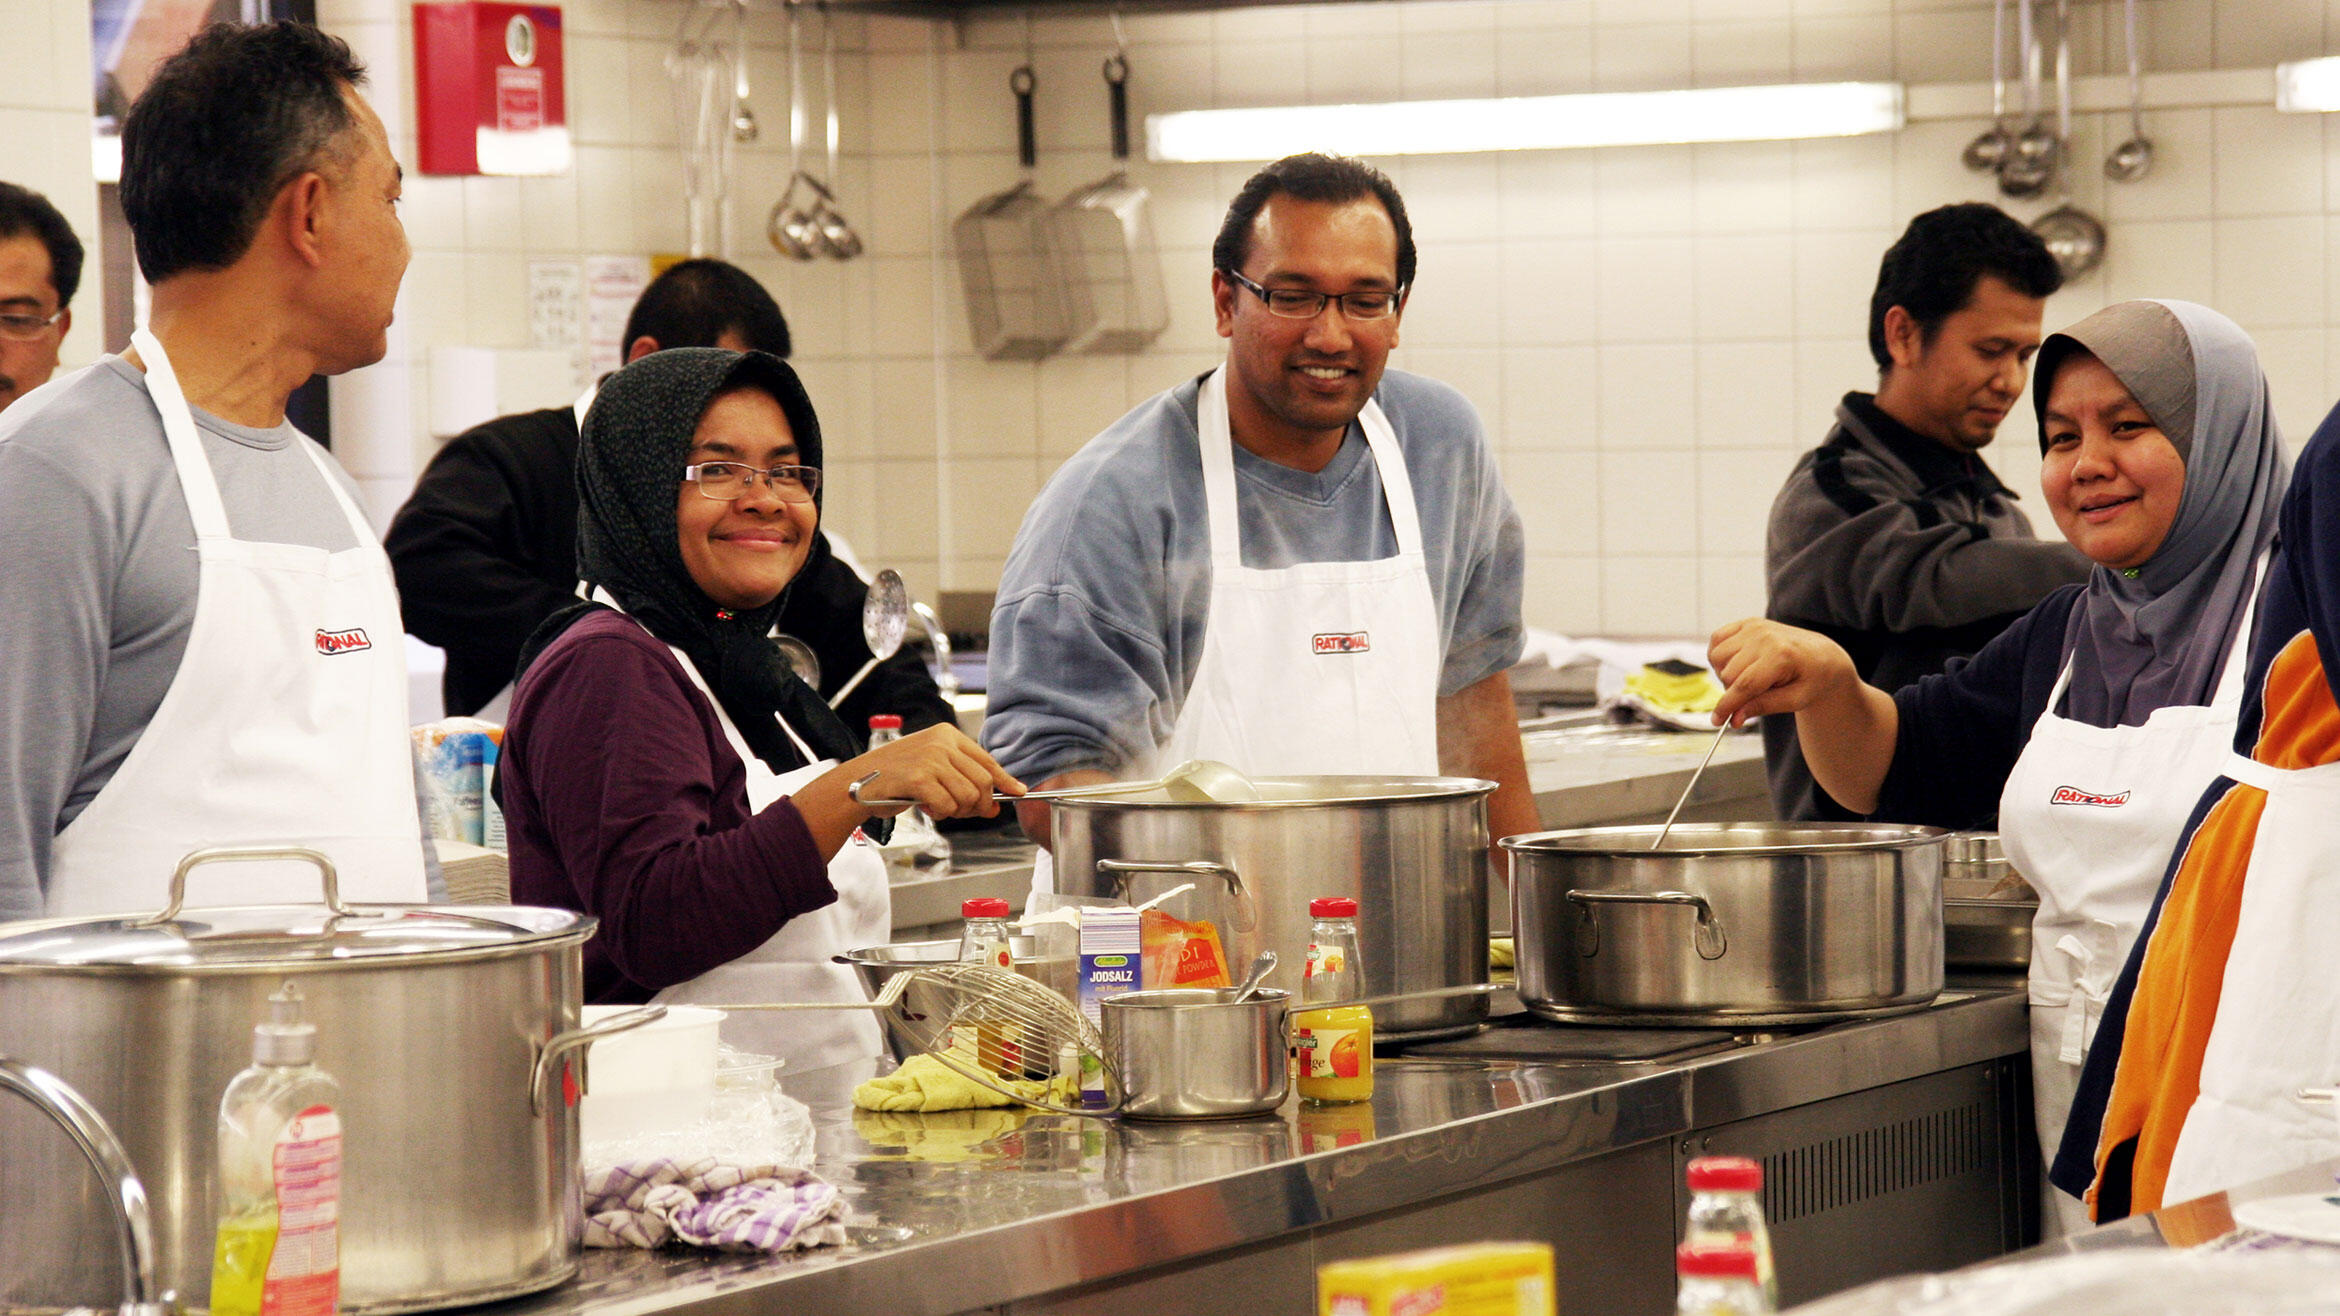 Malaysian trainers are cooking togehter